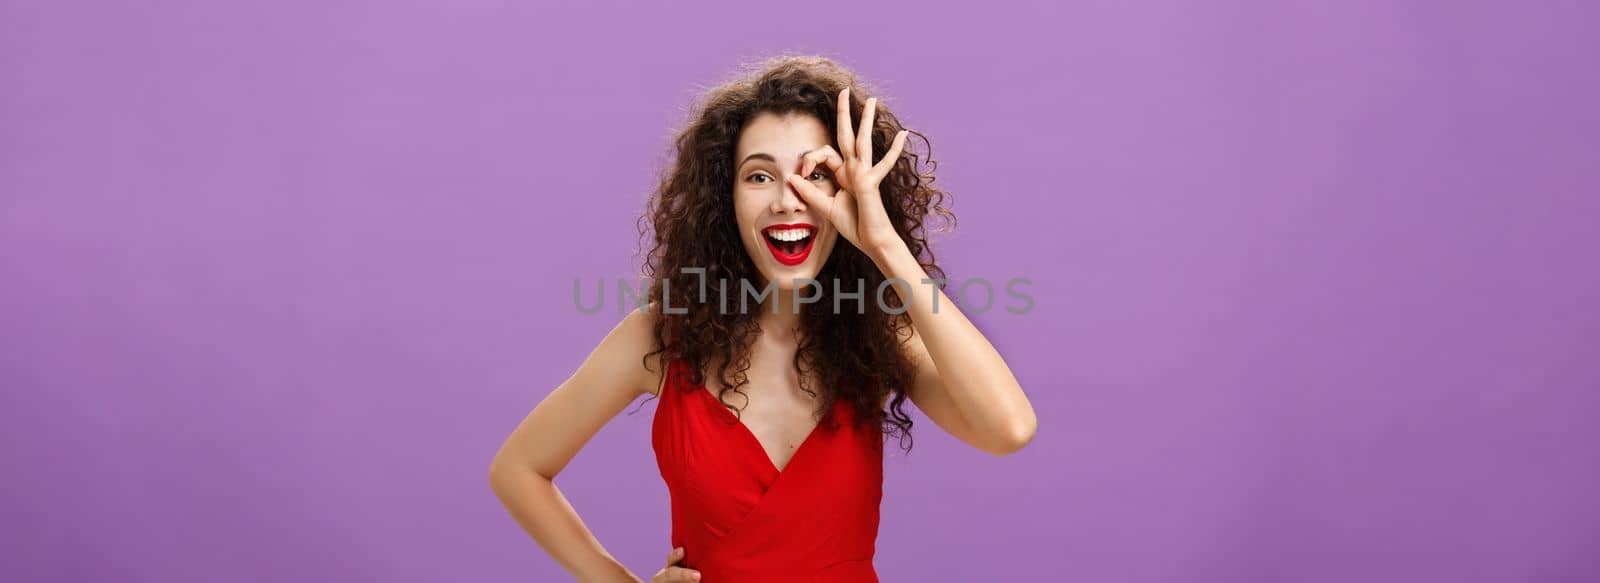 I got zero worries. Portrait of joyful friendly and happy charming woman with curly hairstyle in elegant red dress holding hand on waist smiling amused showing okay sign over eye looking through it.